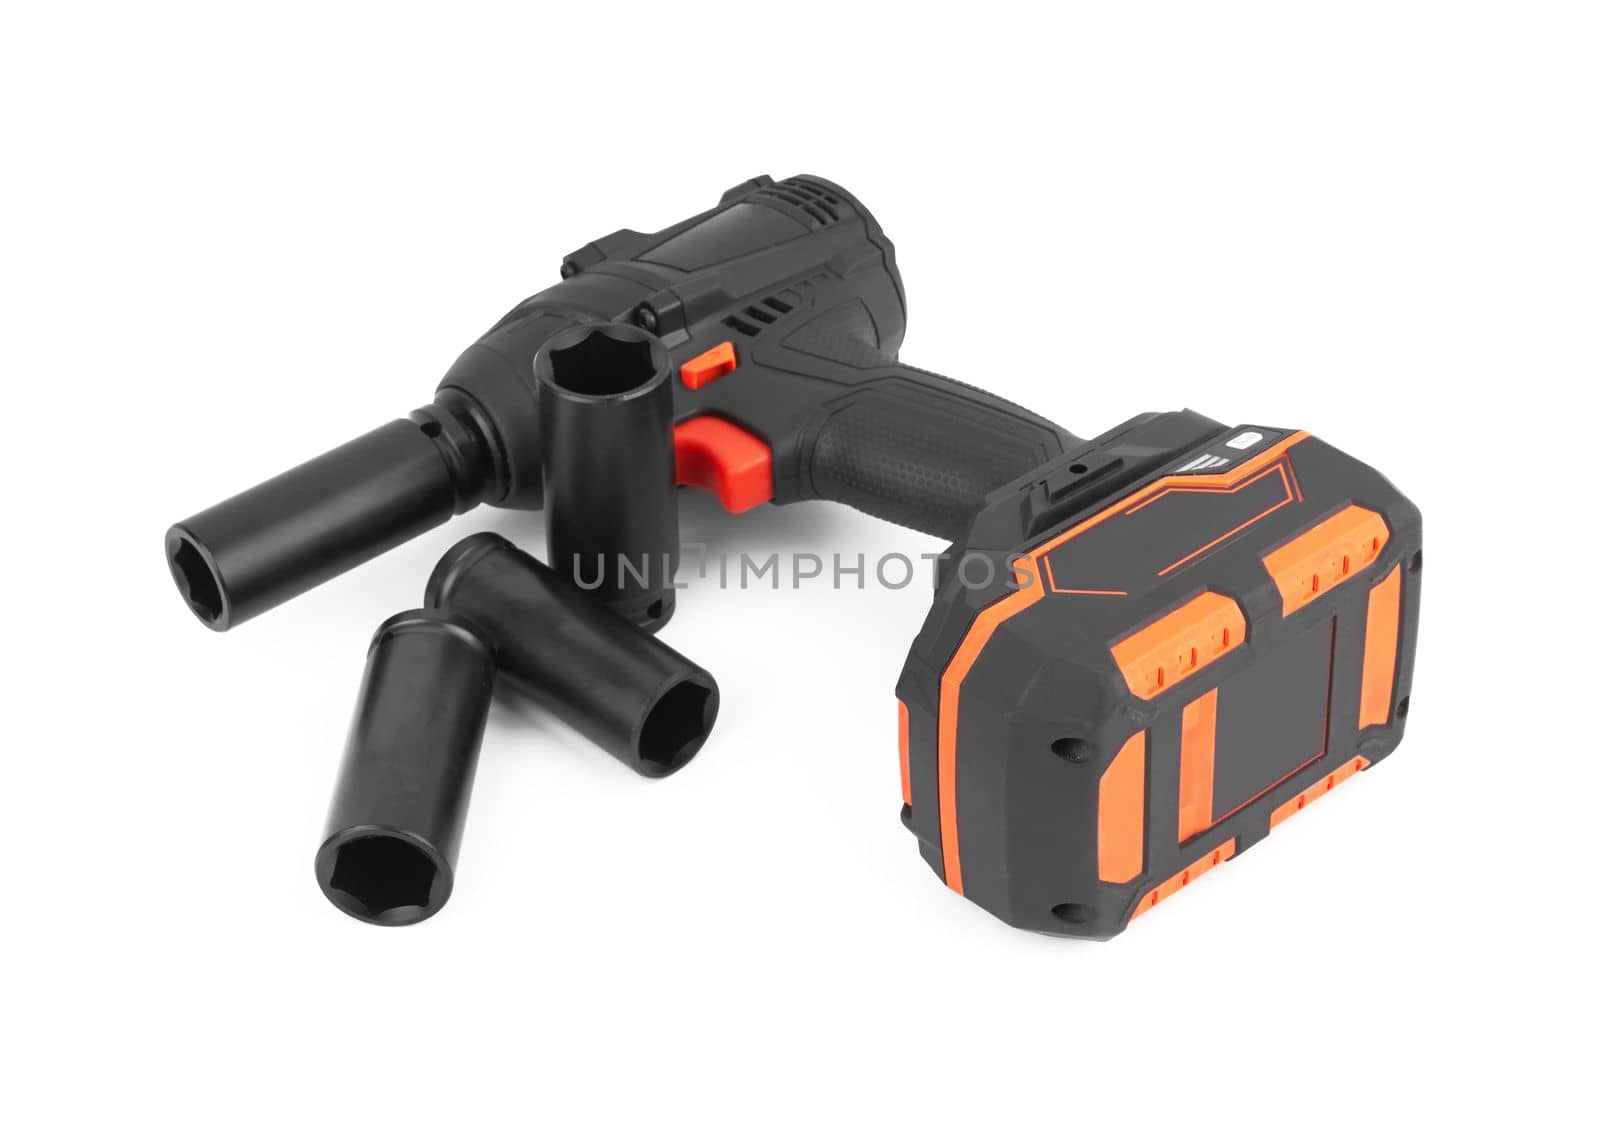 Electric impact wrench by pioneer111